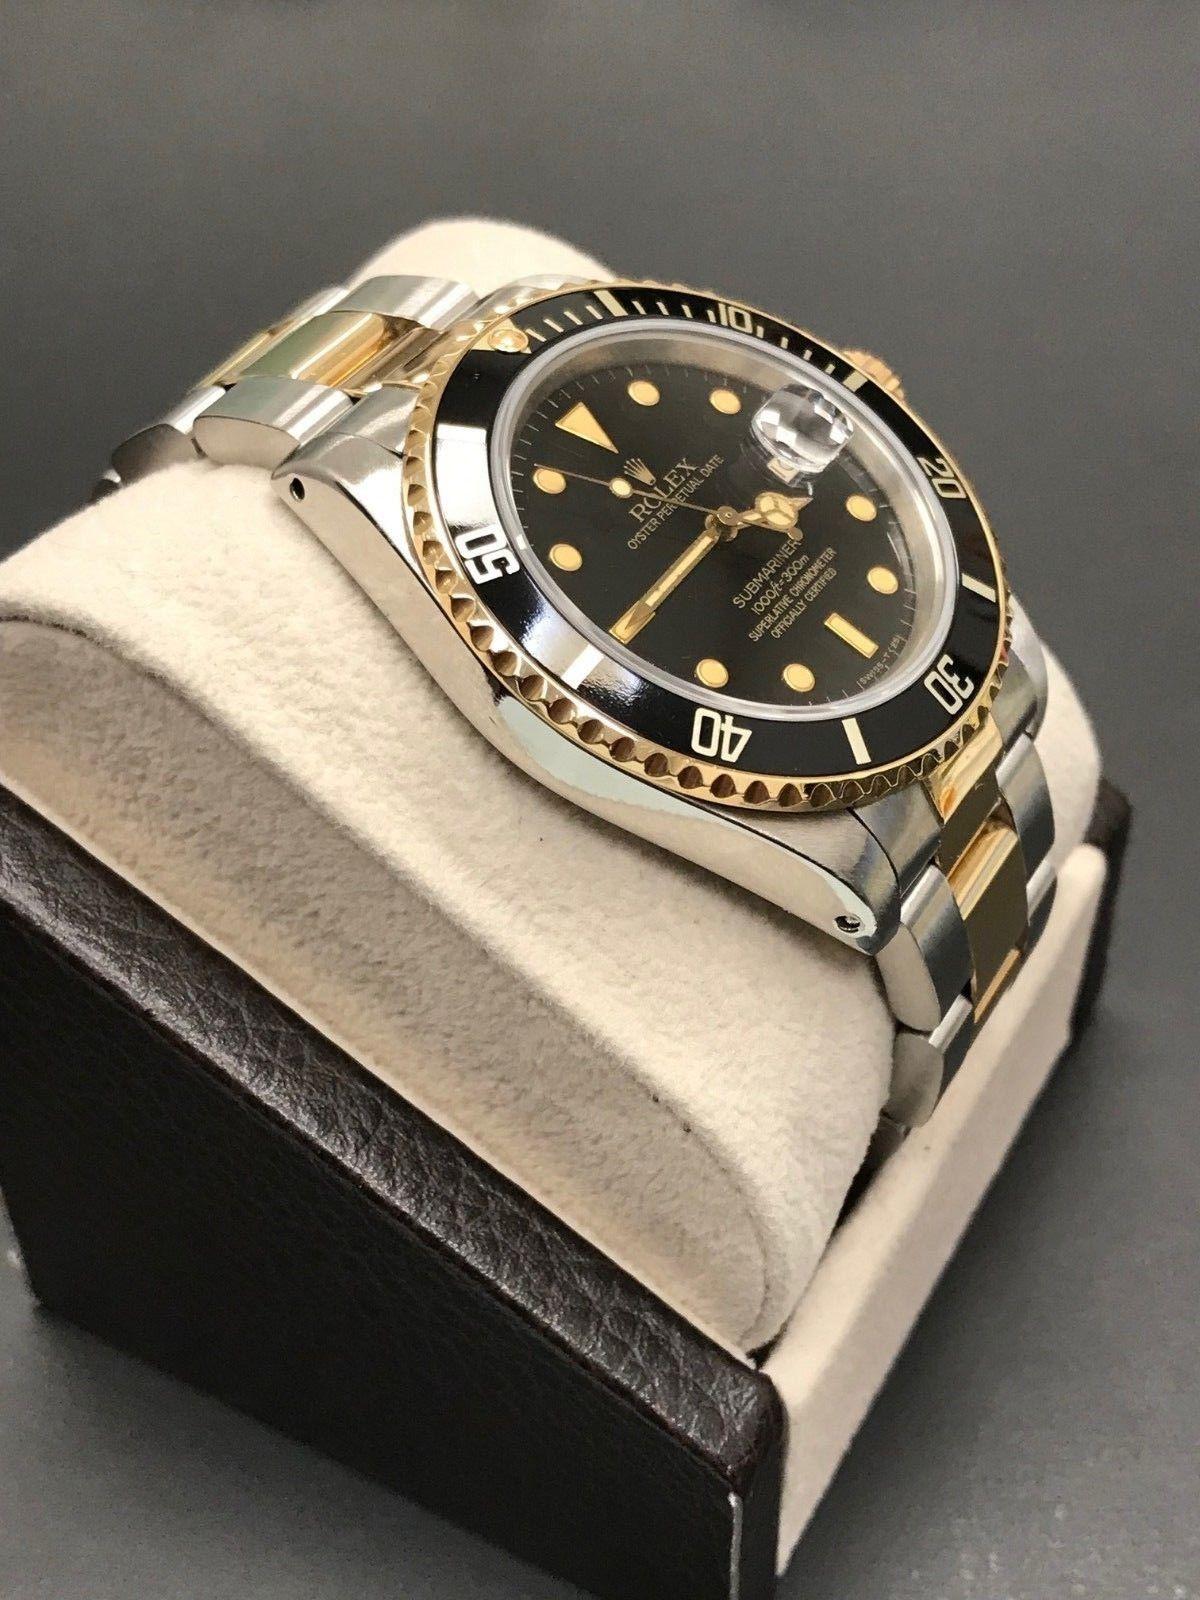 Rolex Submariner 16803 Black Dial 18 Karat Gold and Stainless Steel Rare Dial 3